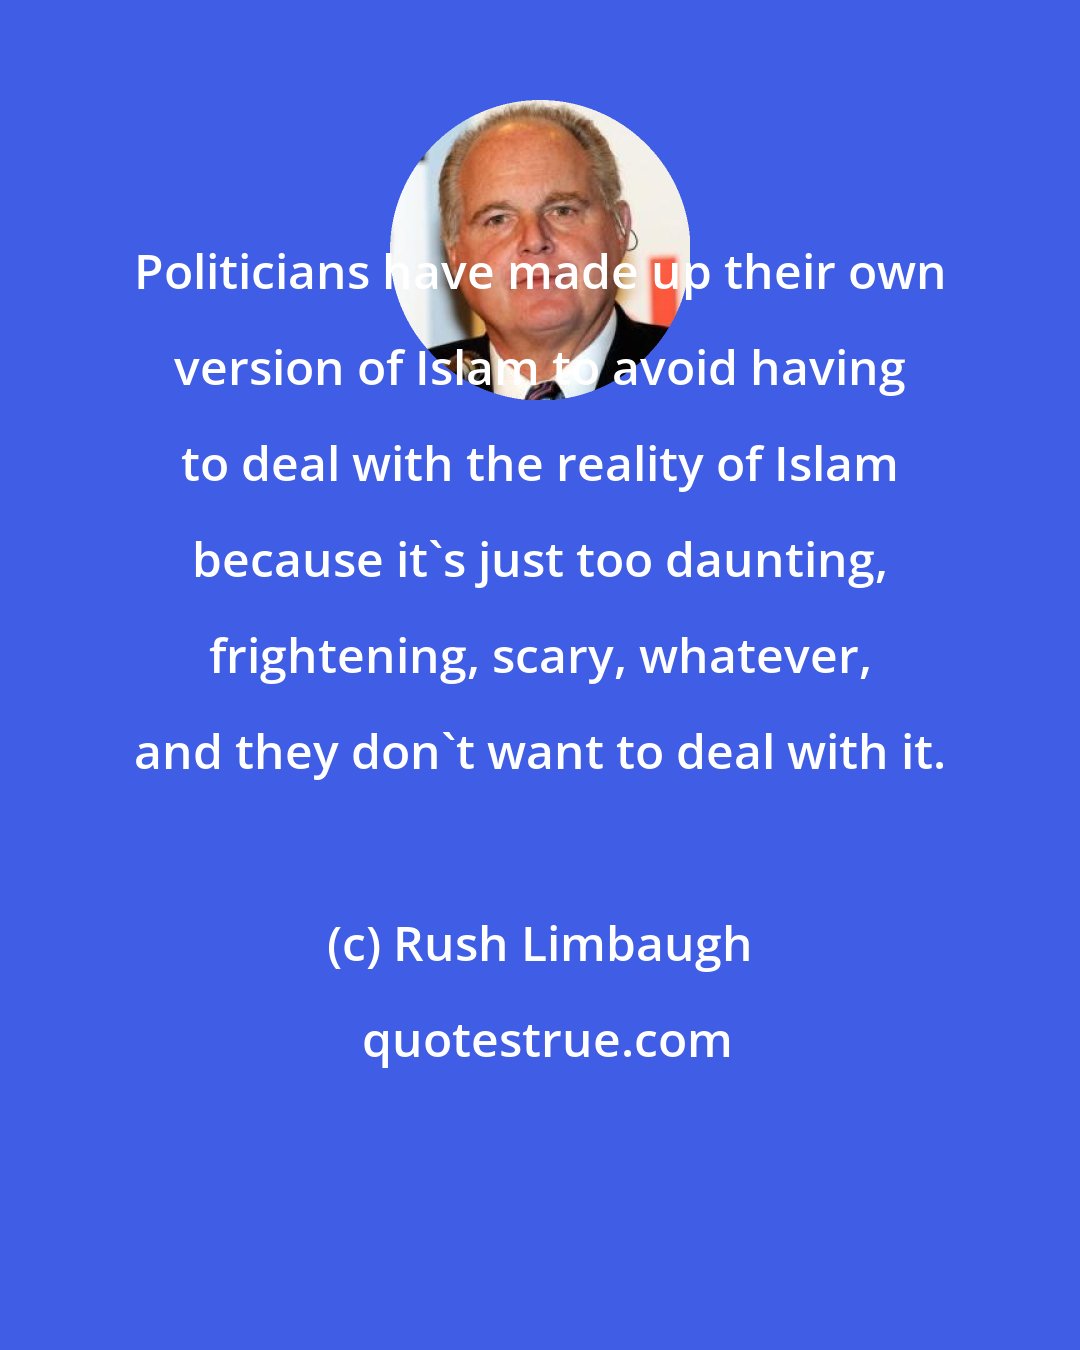 Rush Limbaugh: Politicians have made up their own version of Islam to avoid having to deal with the reality of Islam because it's just too daunting, frightening, scary, whatever, and they don't want to deal with it.